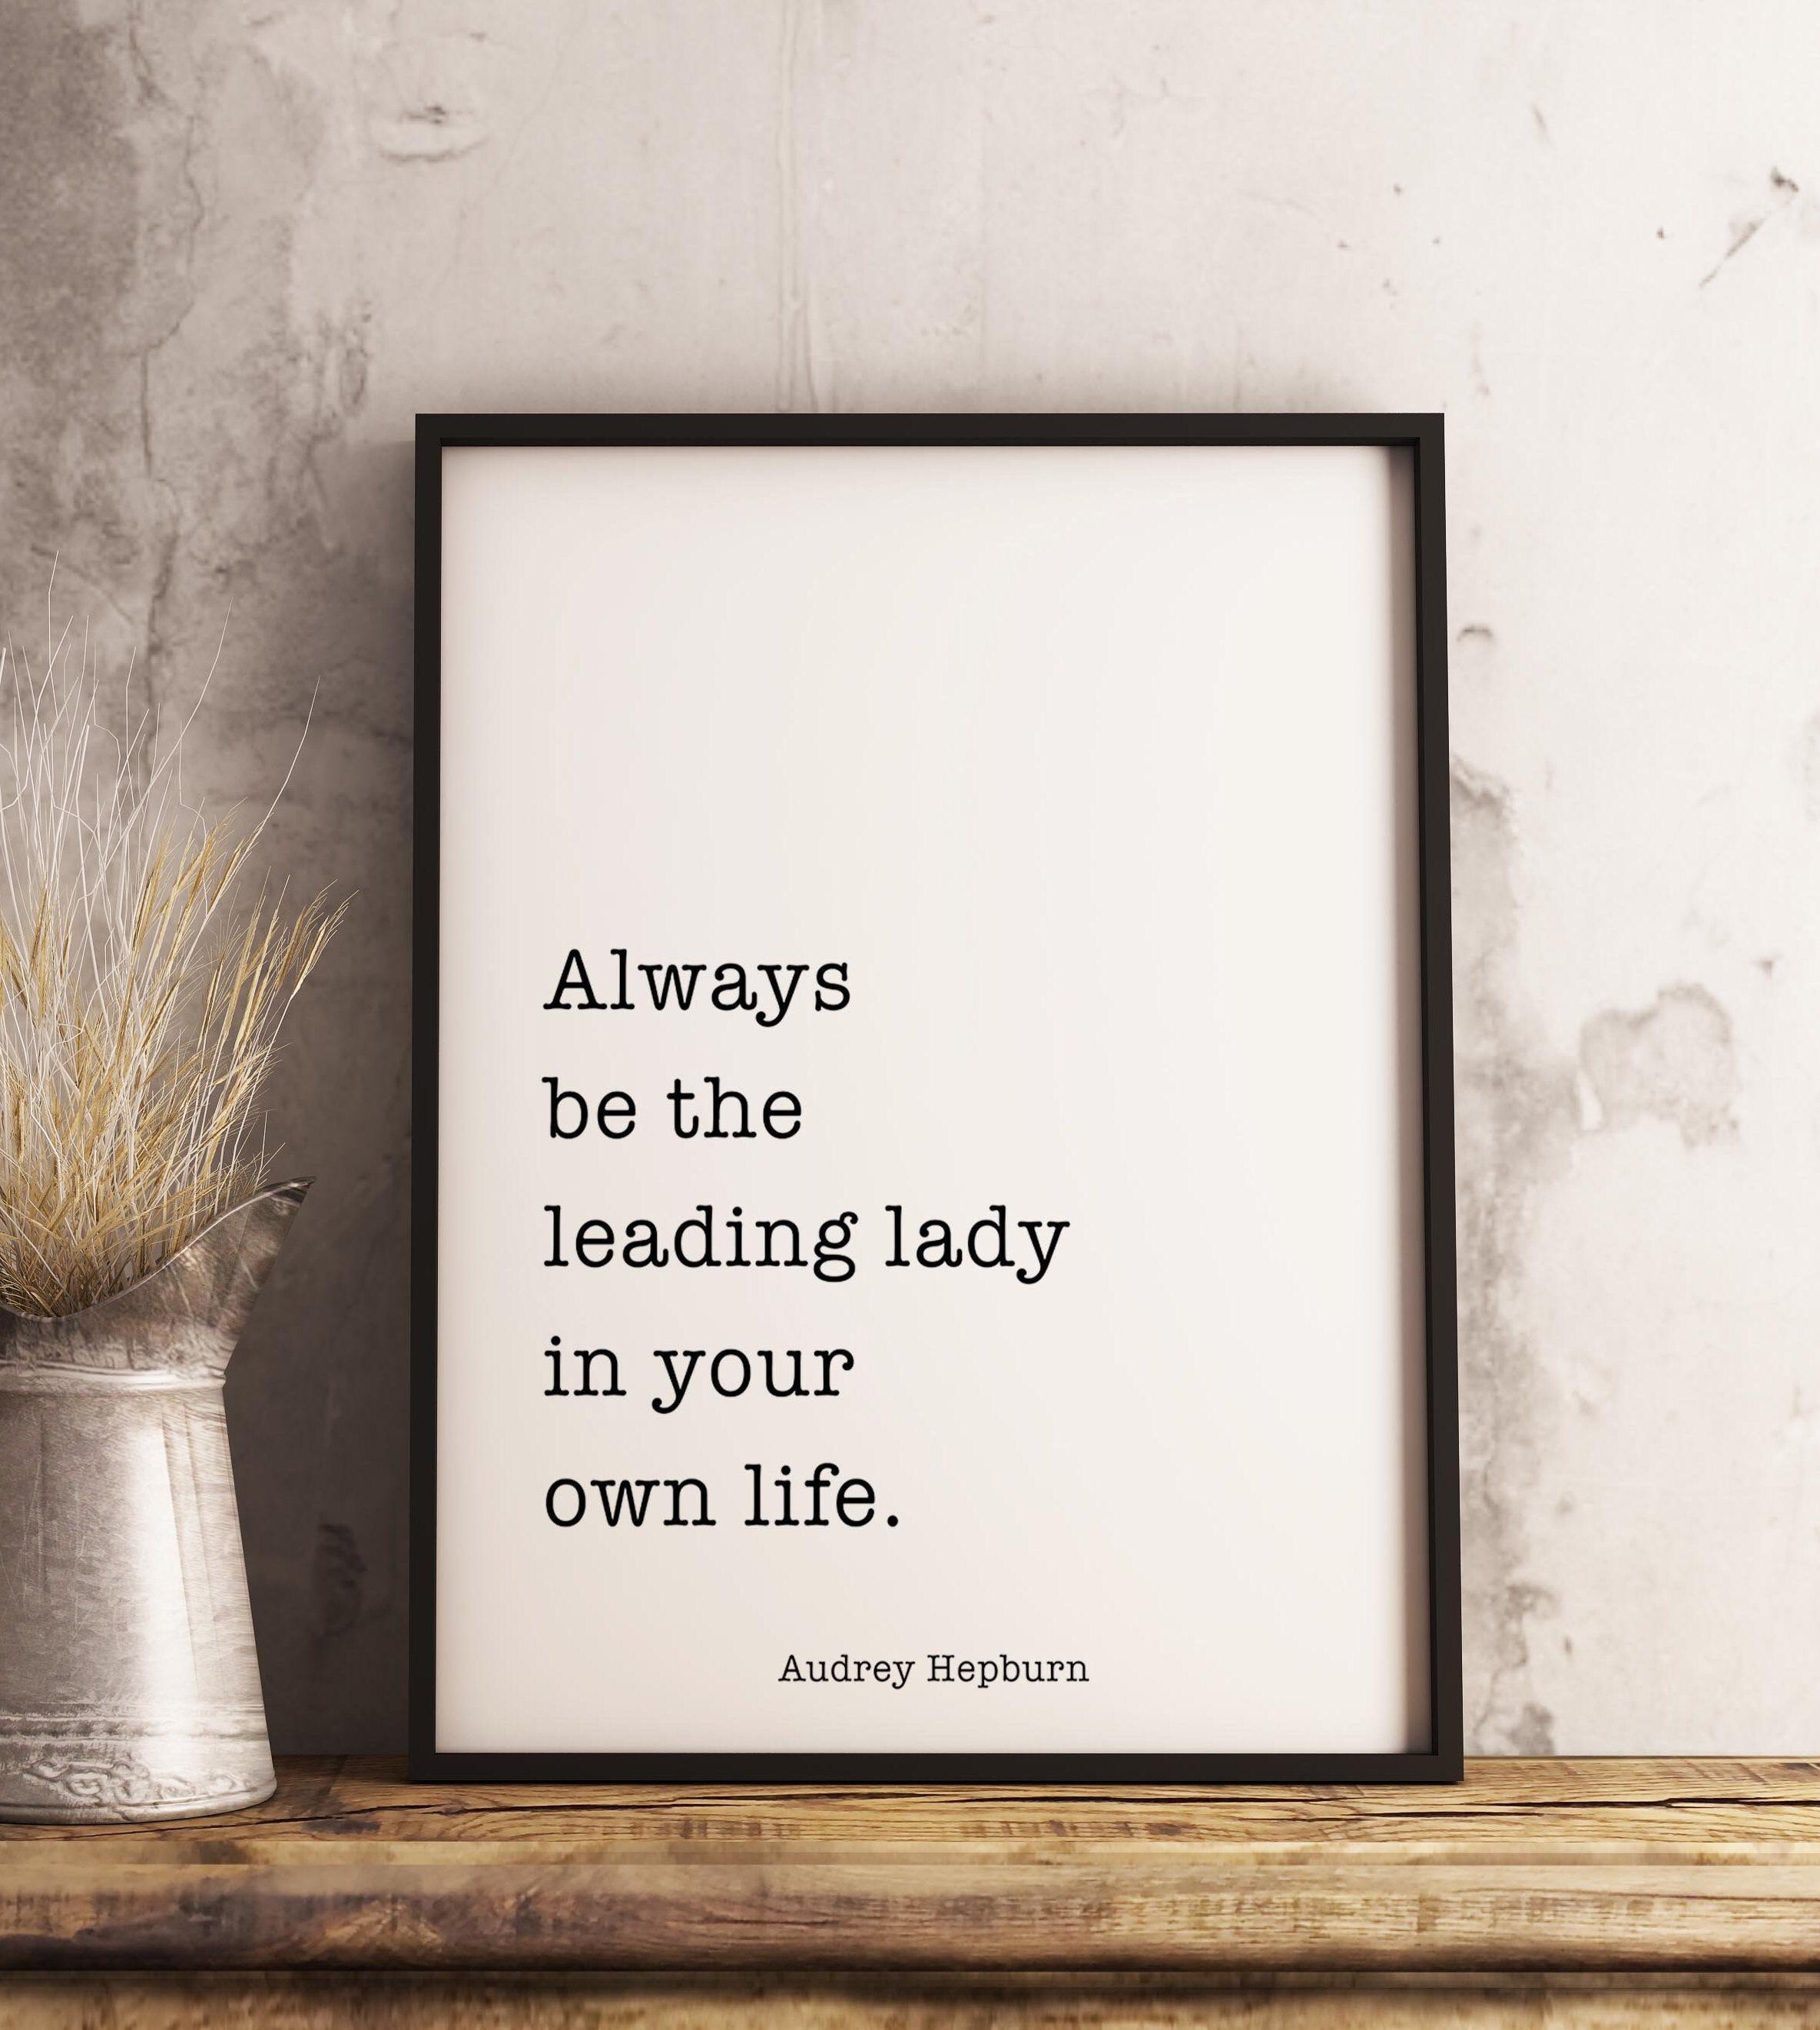 Audrey Hepburn Quote, Always be the leading lady in your own life. Audrey Hepburn Print -   19 beauty Quotes audrey hepburn ideas